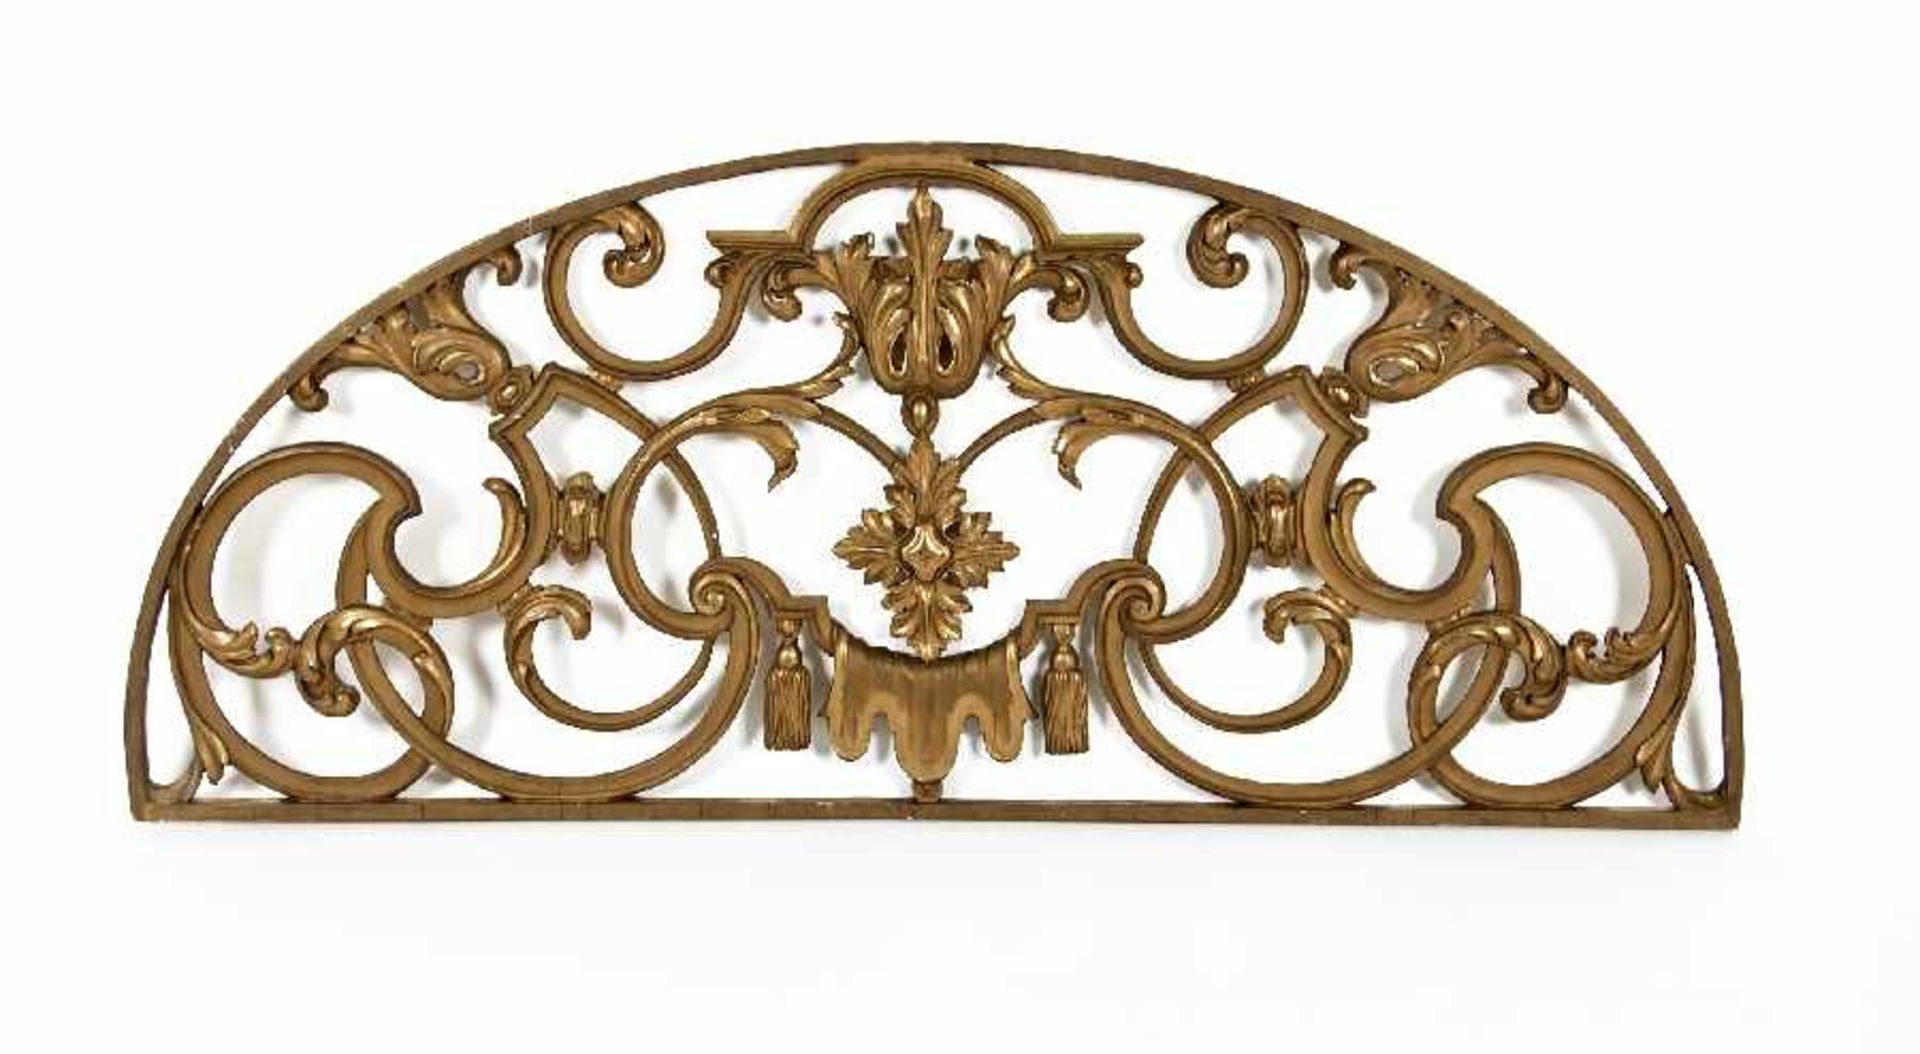 Probably France, 19th centurySupraporteWood, carved and golden-painted; H 66.5 cm, W 158.5 cmWohl